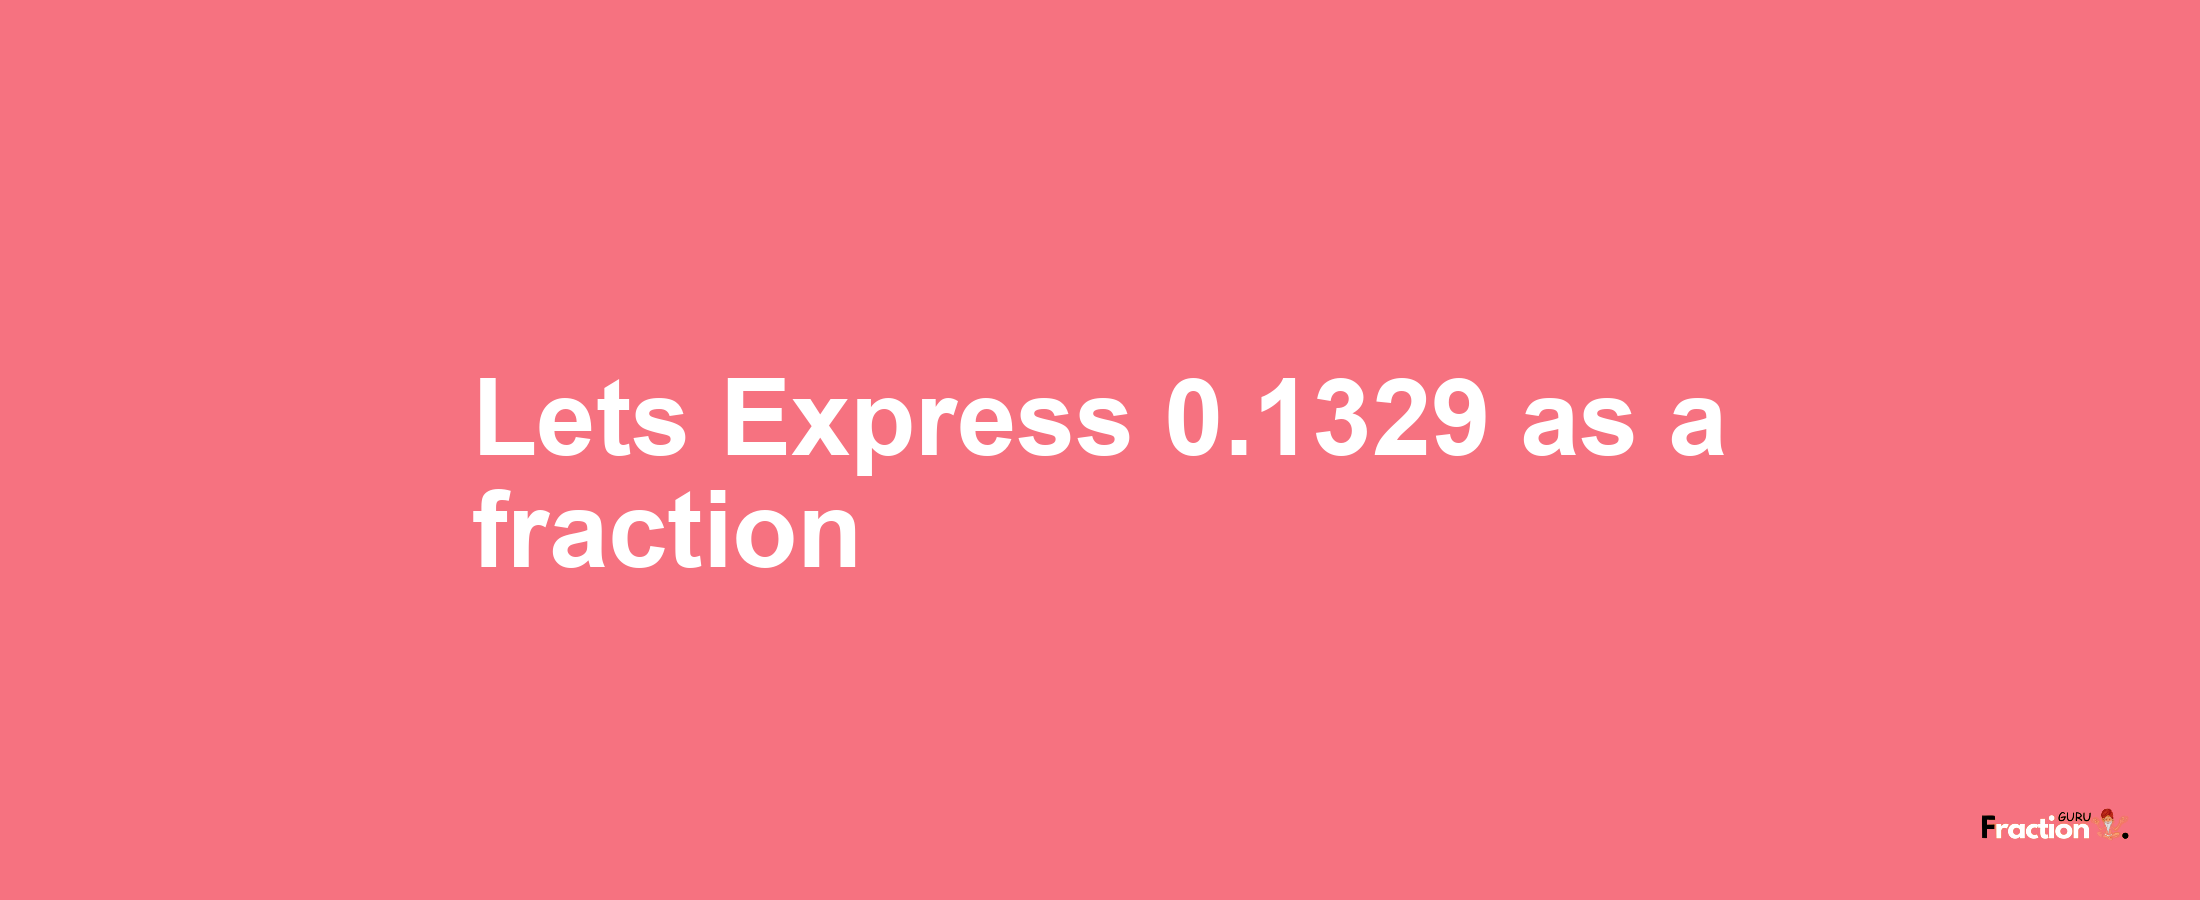 Lets Express 0.1329 as afraction